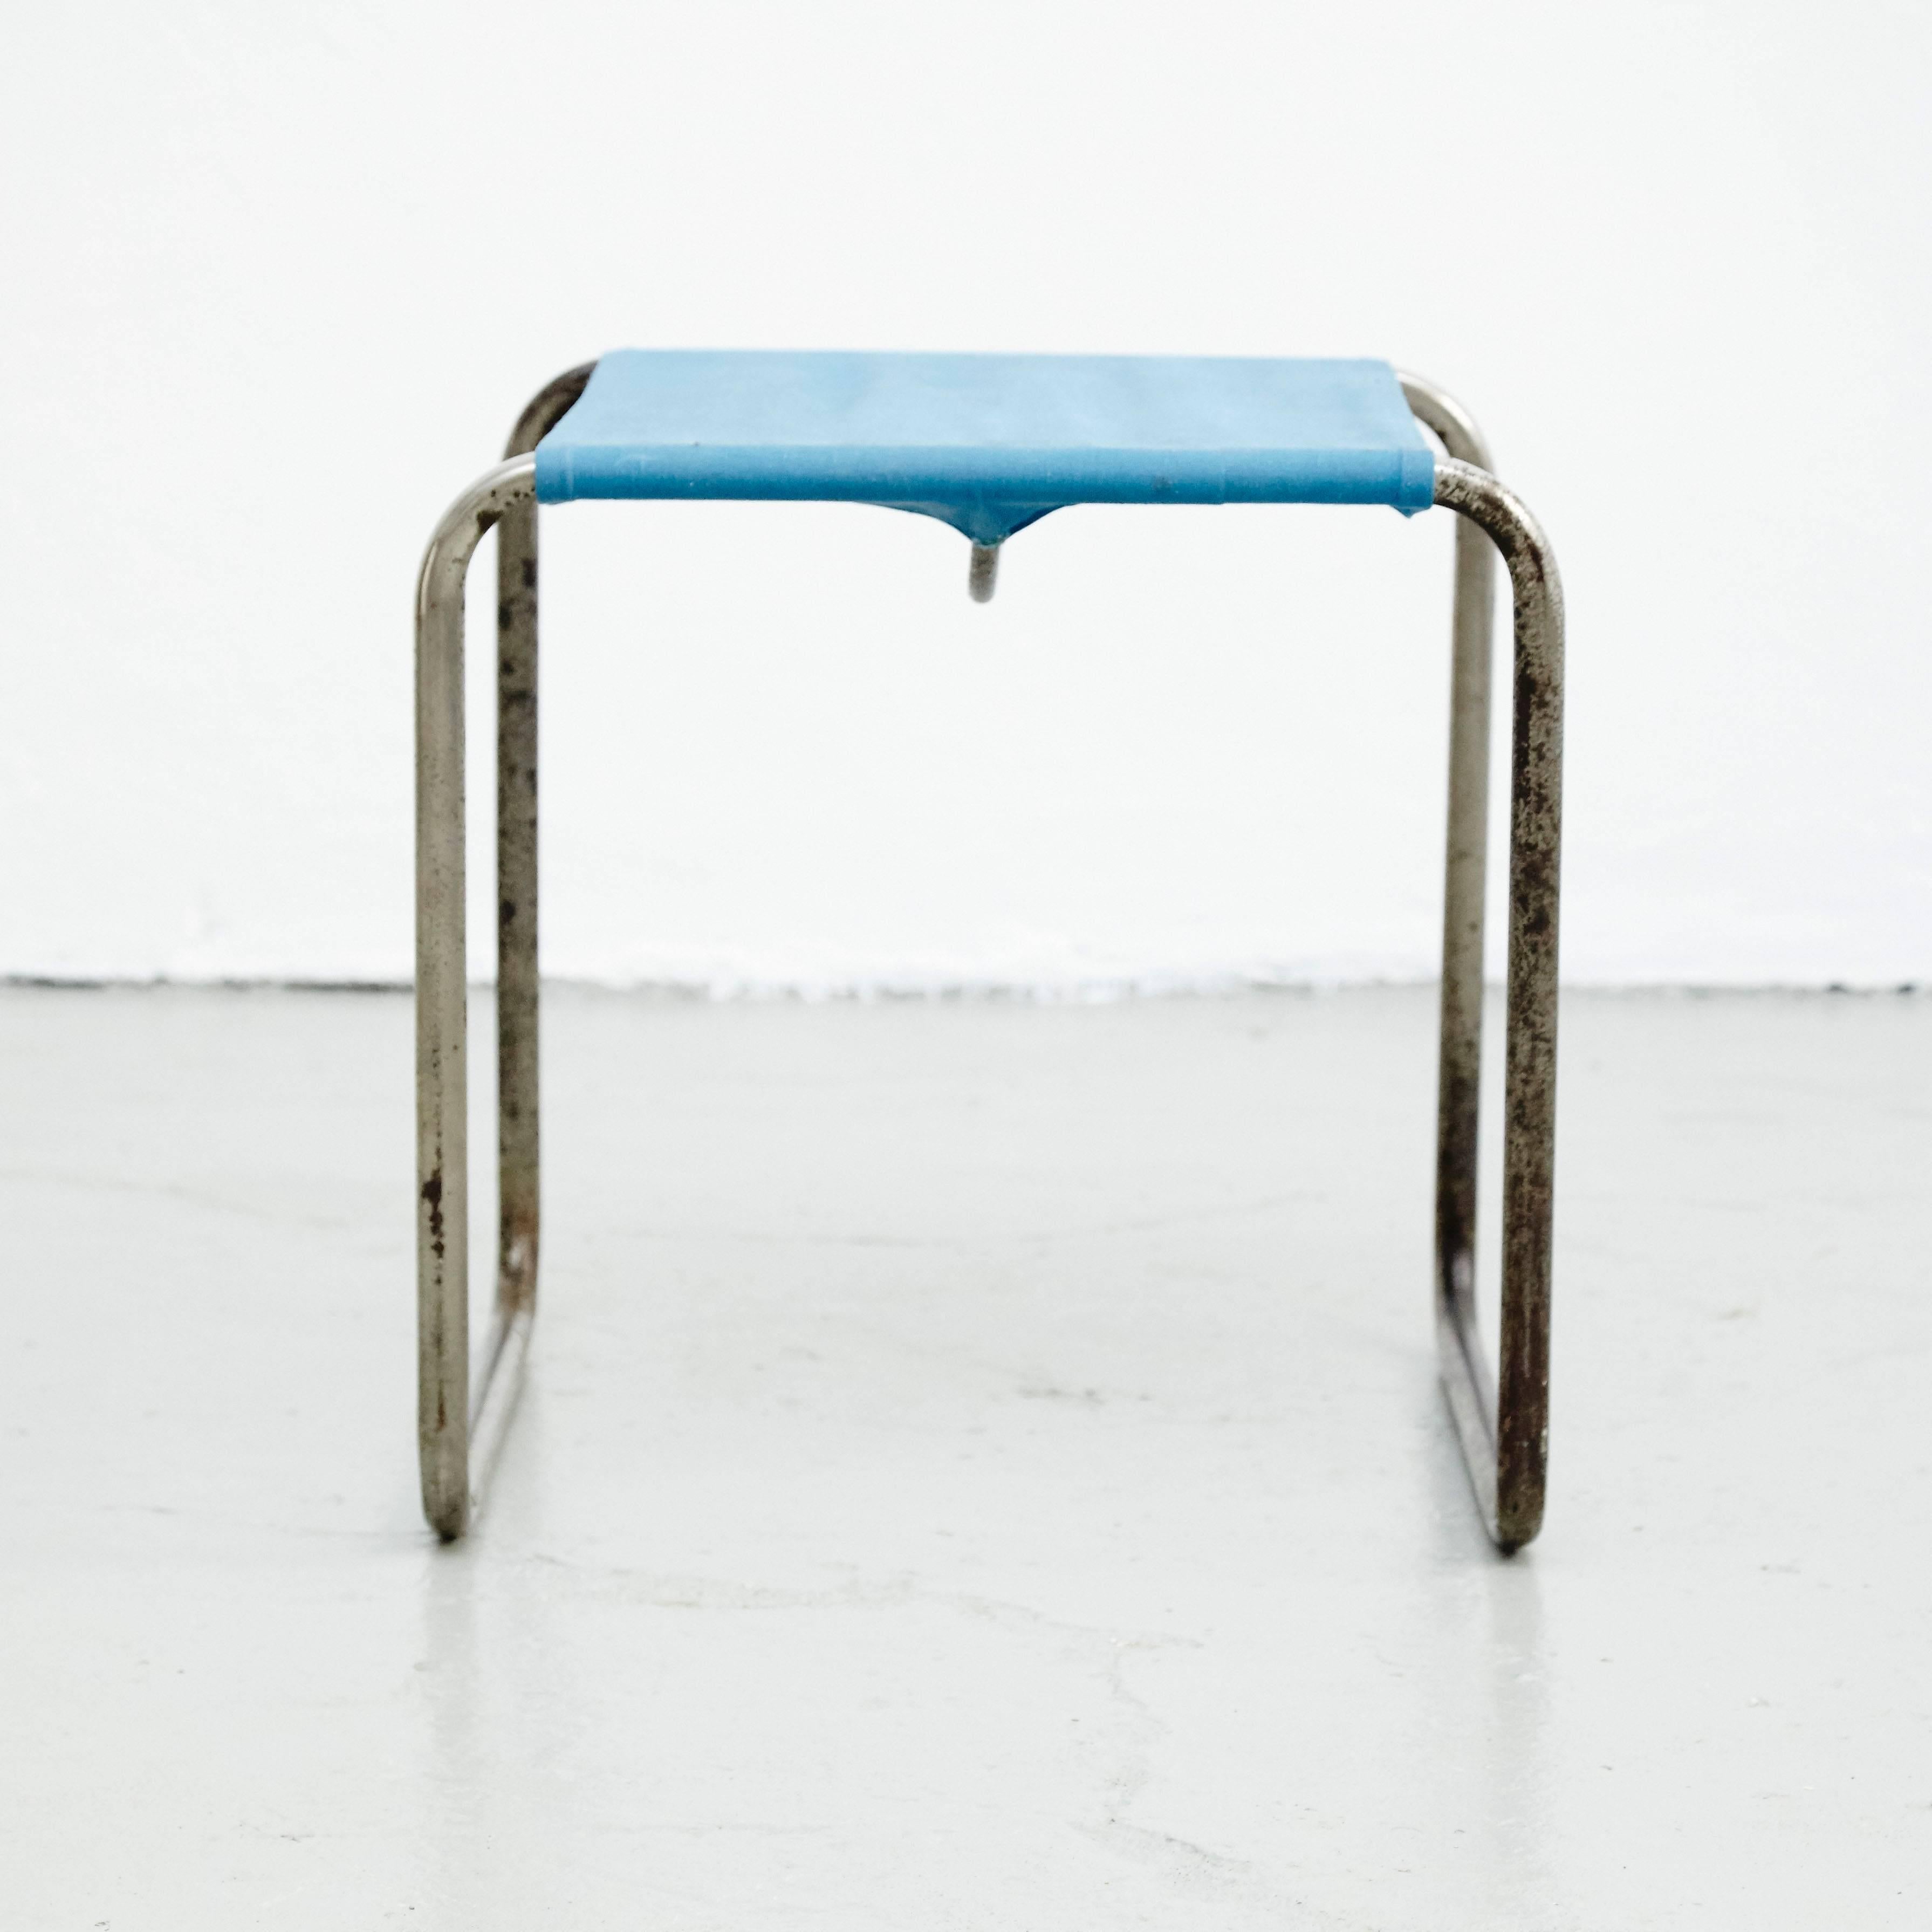 Marcel Breuer B9T Stool for Thonet with Blue Fabric and Metal Tube, circa 1930 (Moderne der Mitte des Jahrhunderts)